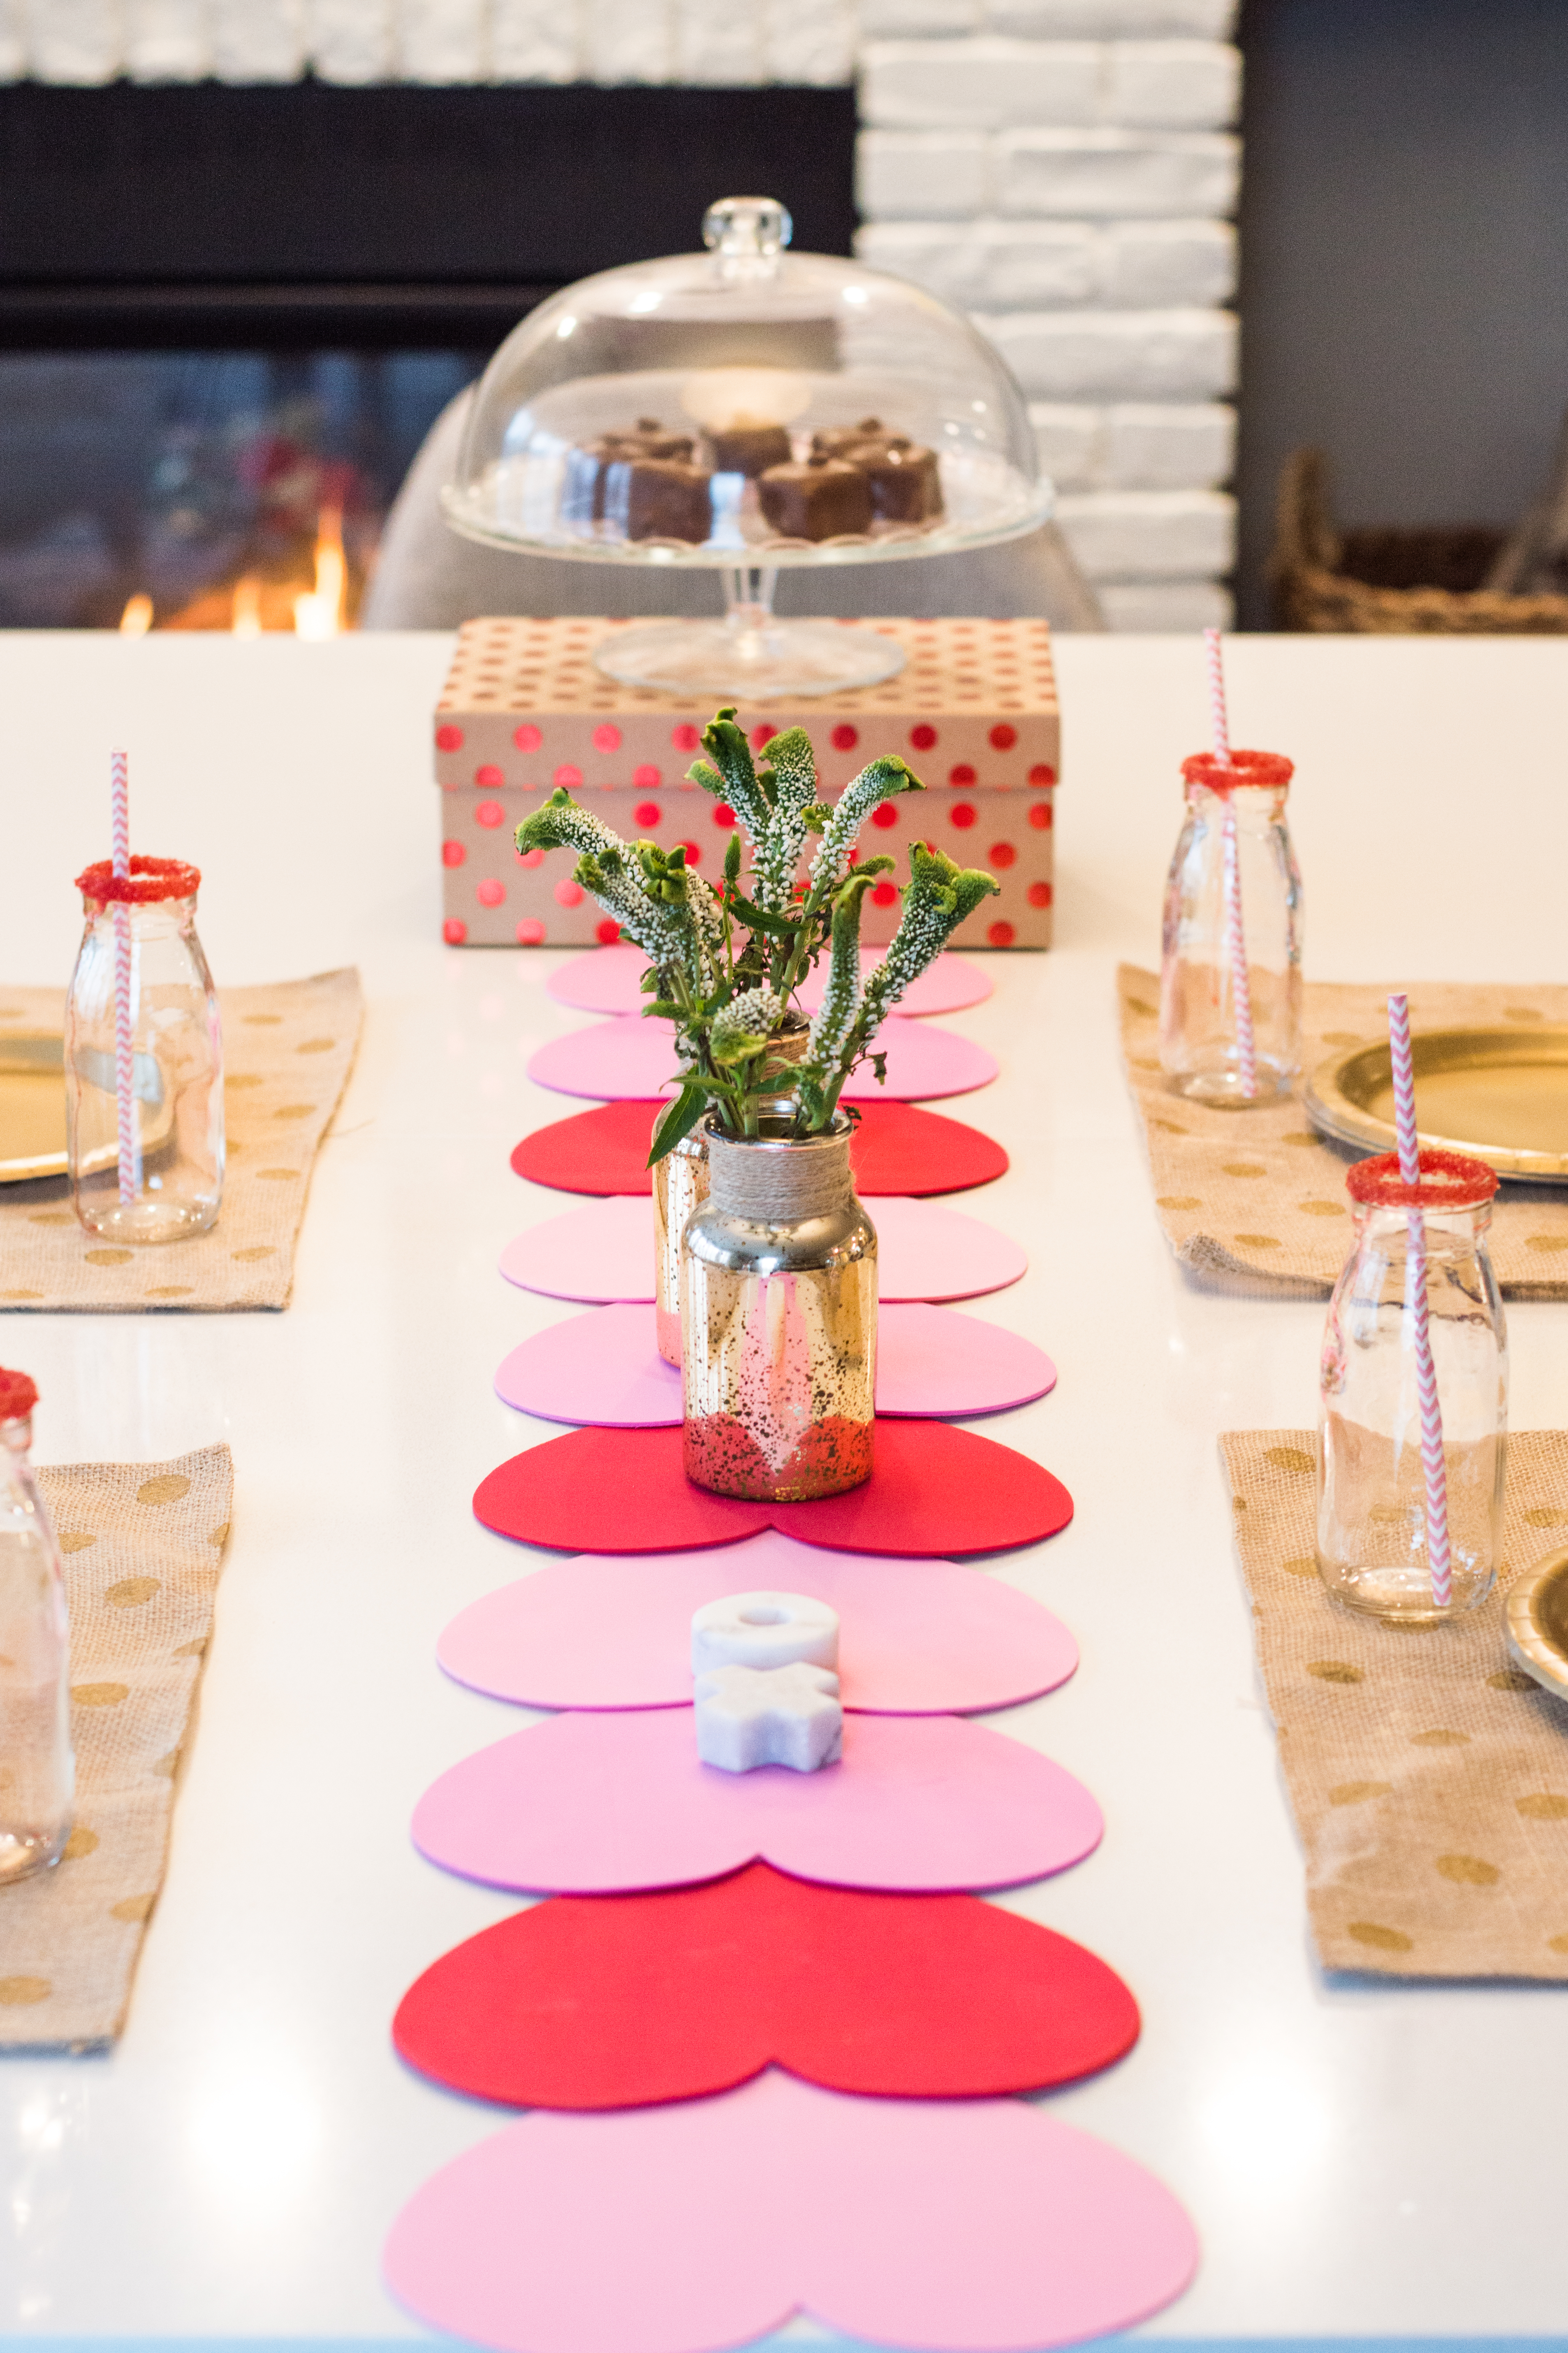 This Valentines DIY Table Runner is a simple way to bring Valentine's to your house, or a kid's party.